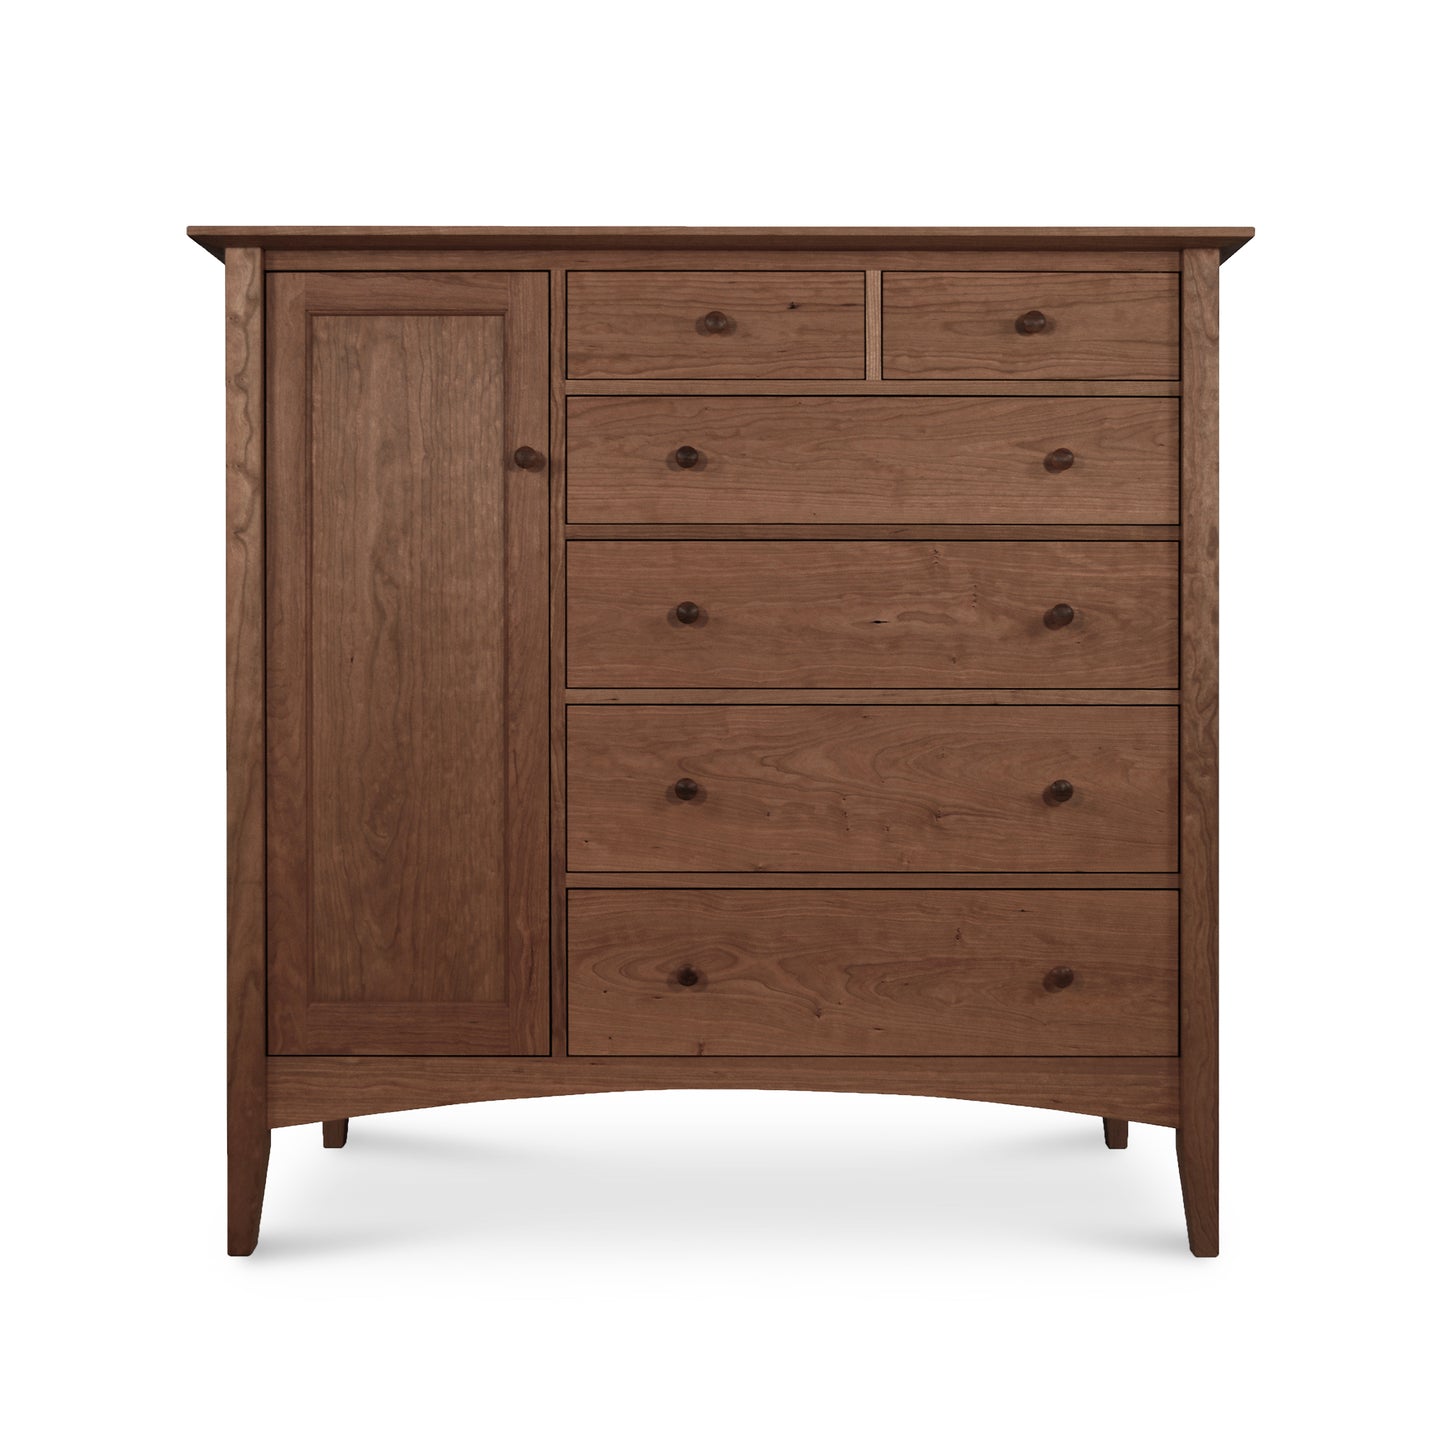 A Maple Corner Woodworks American Shaker Gent's Chest with a single door on the left and five drawers on the right, standing on four slanted legs against a white background.